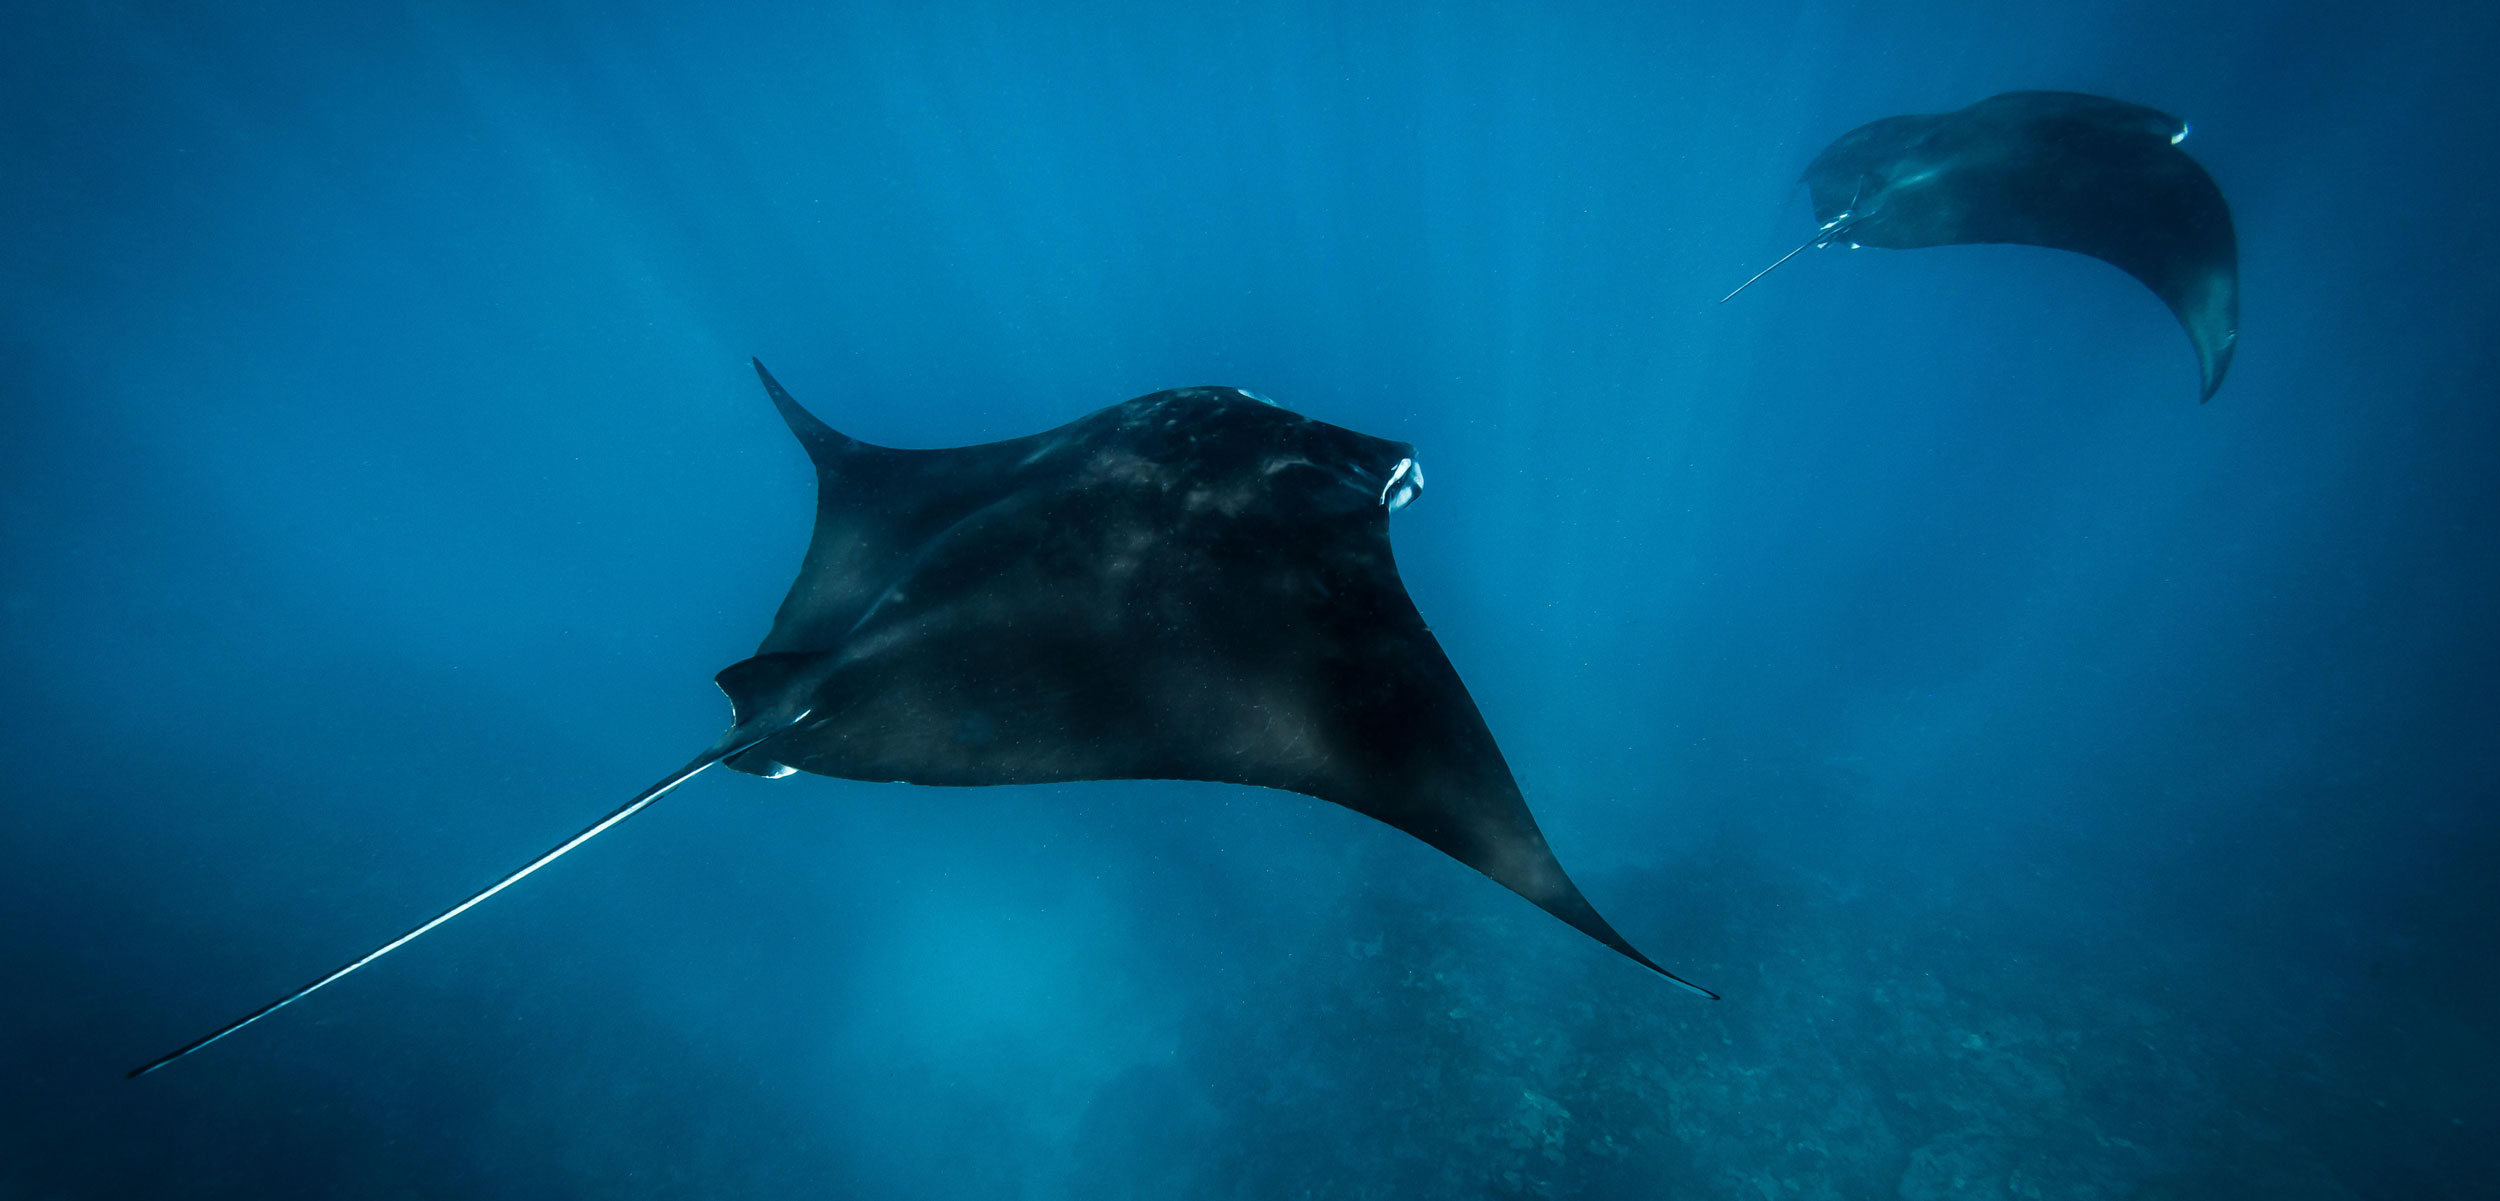 Two manta rays swim in the waters off Exmouth, Western Australia